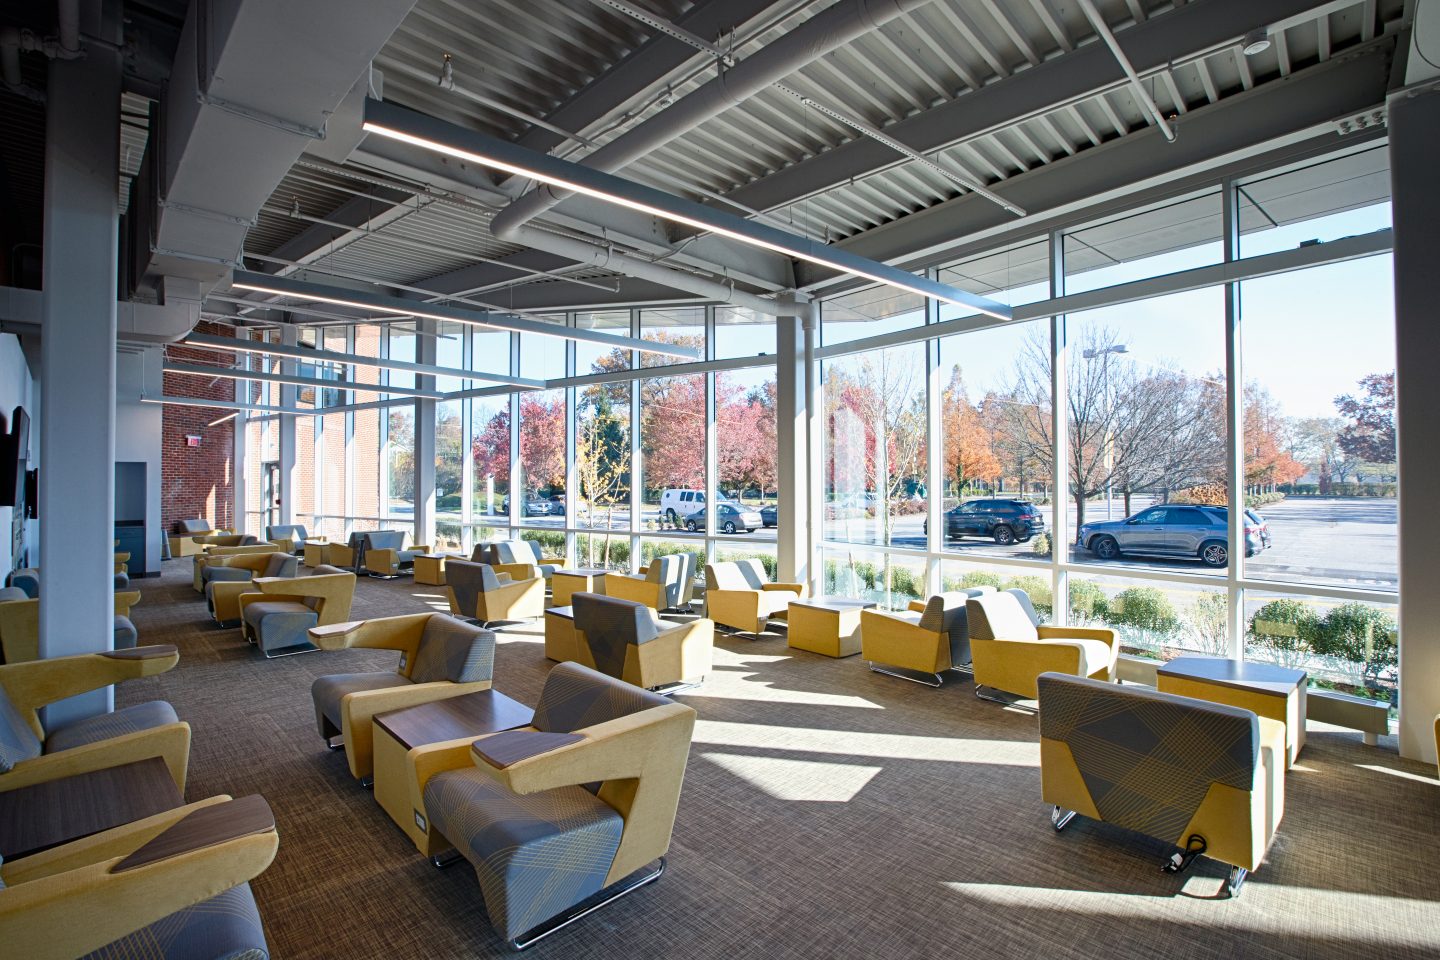 Seating area in the student lounge on the first floor of the the UC